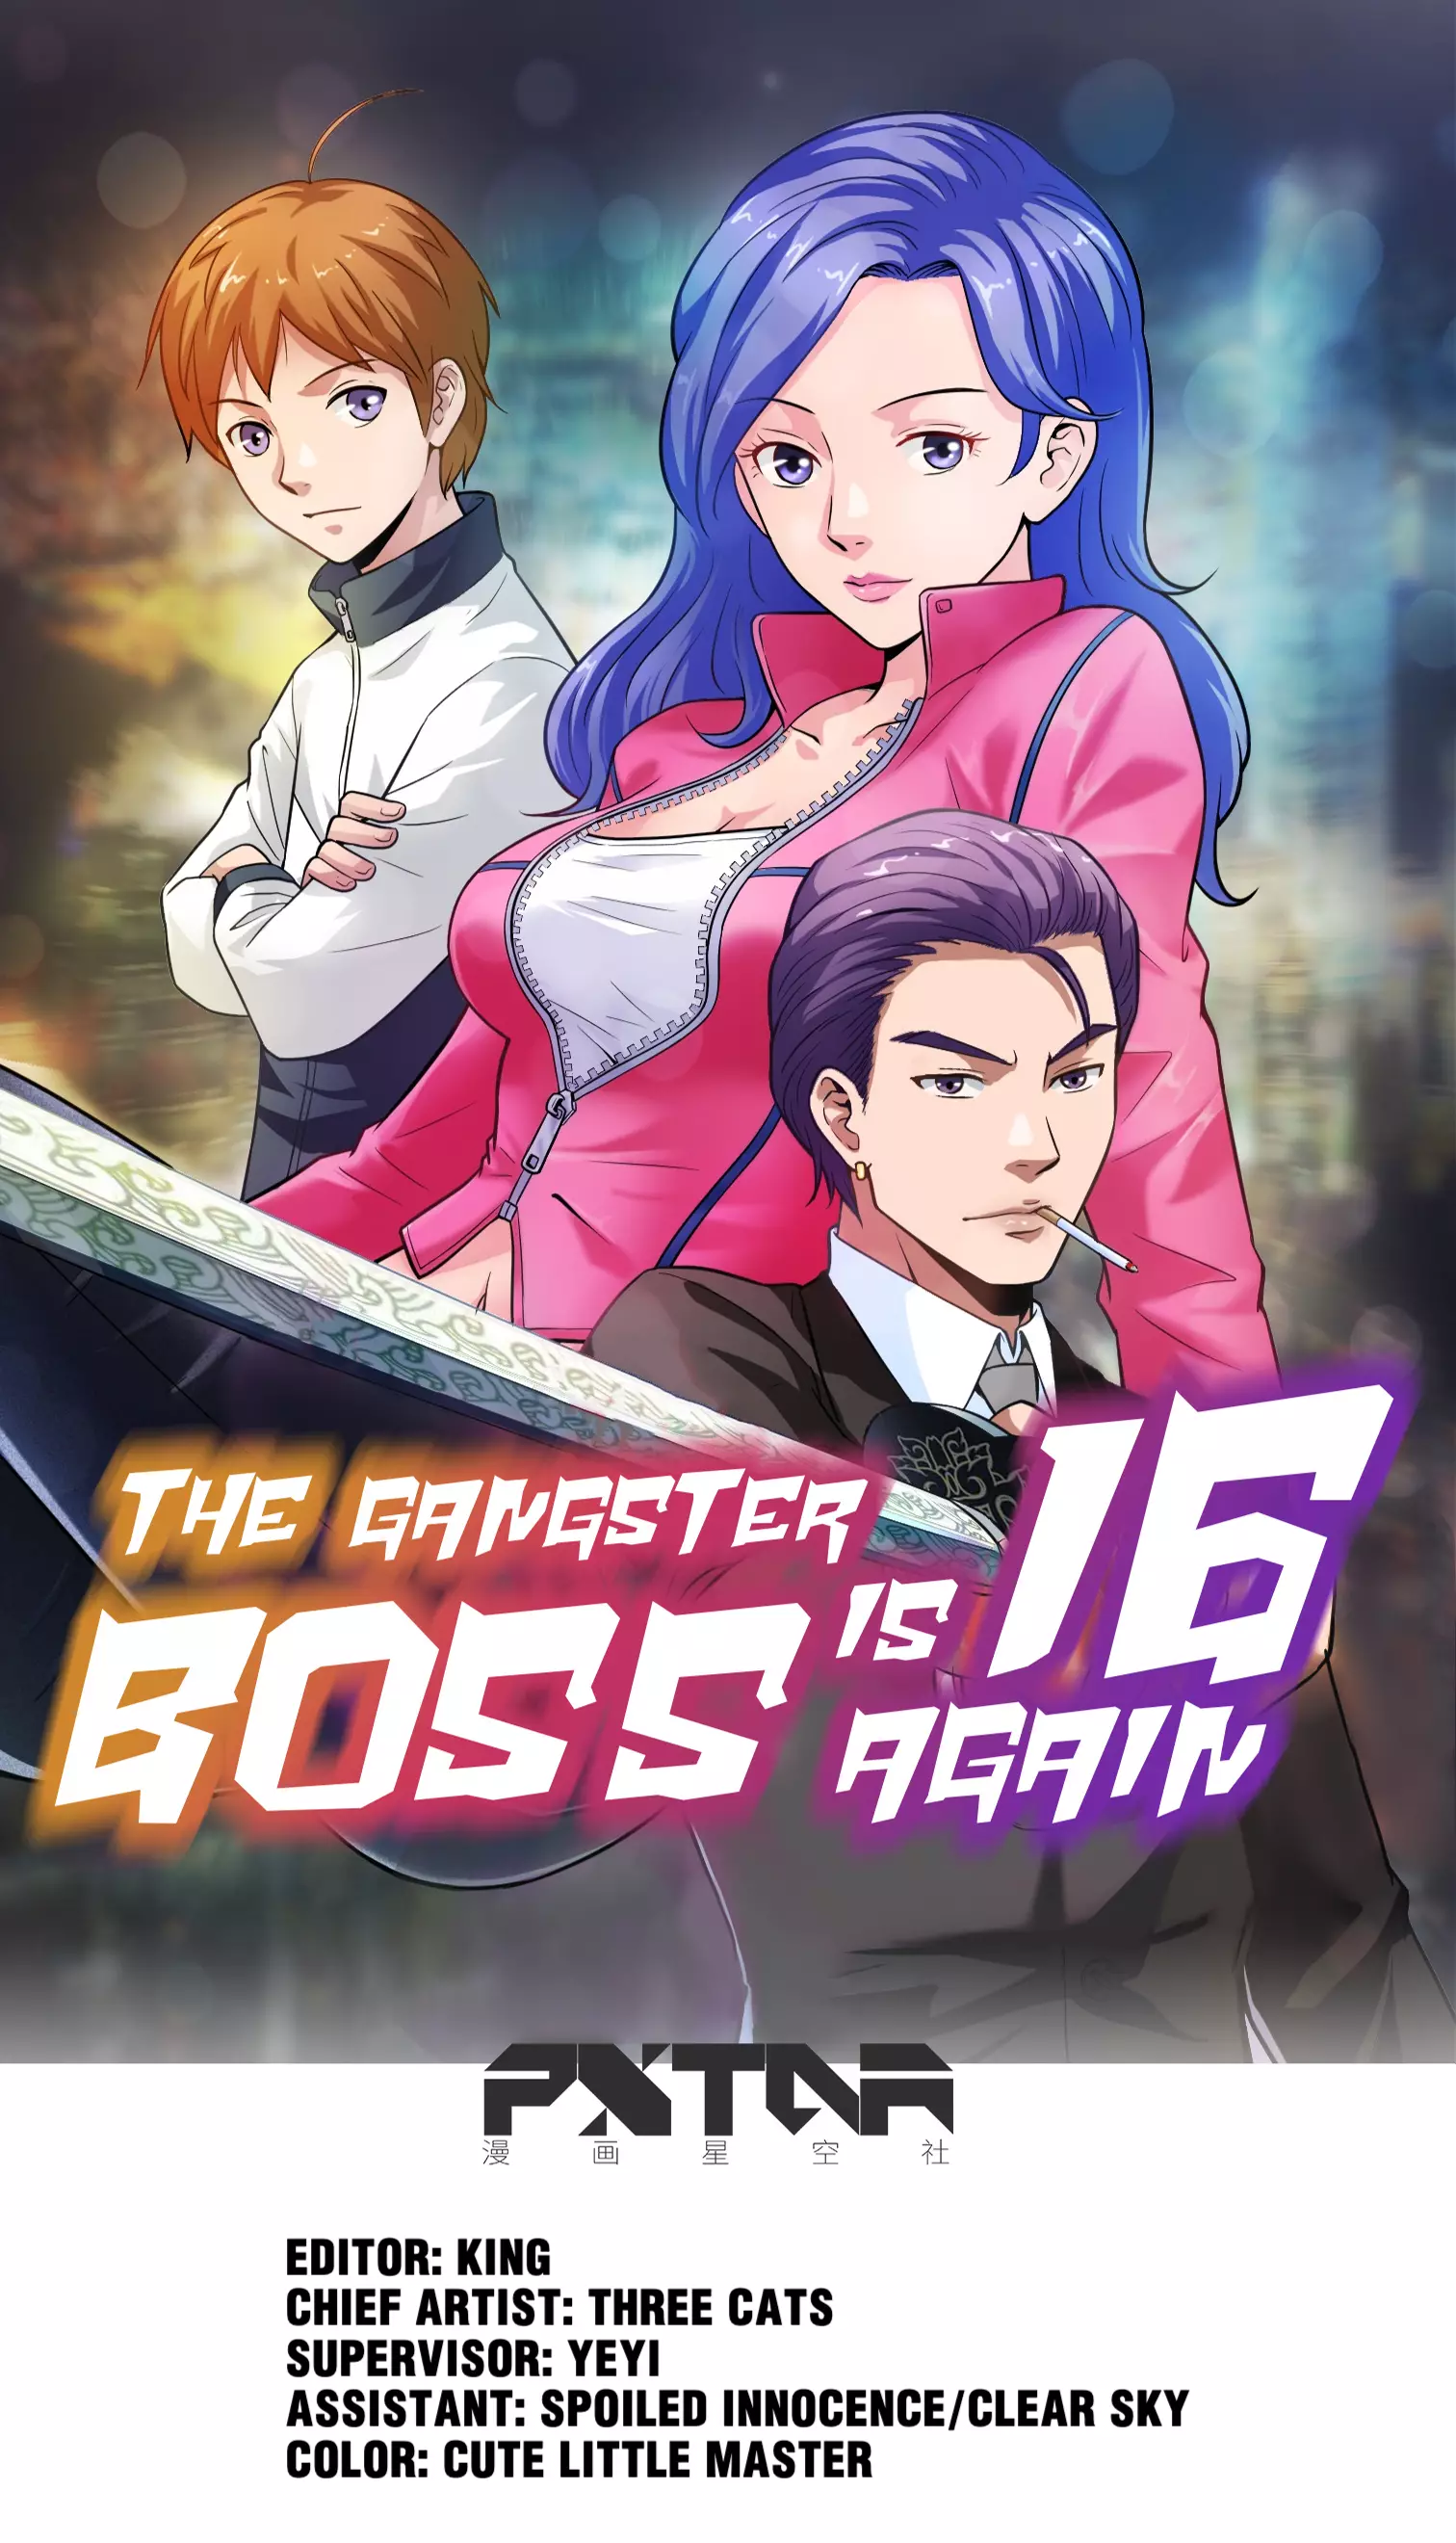 The Gangster Boss Is 16 Again - 35.1 page 1-9ab0d3e3